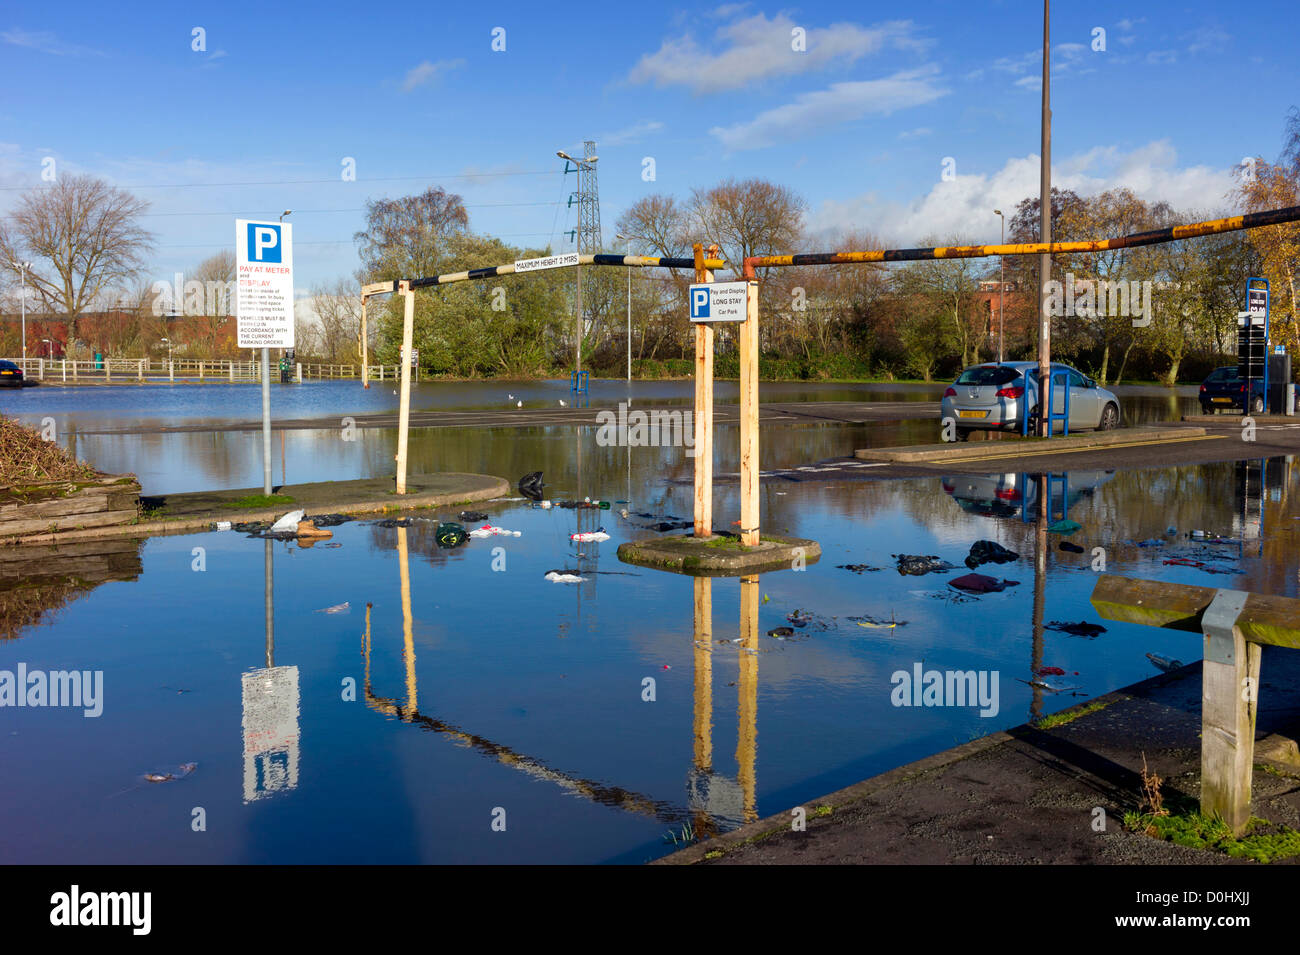 After days of rainfall the car park is closed, scenes of flooding, floating debris, abandoned cars await their owners Stock Photo